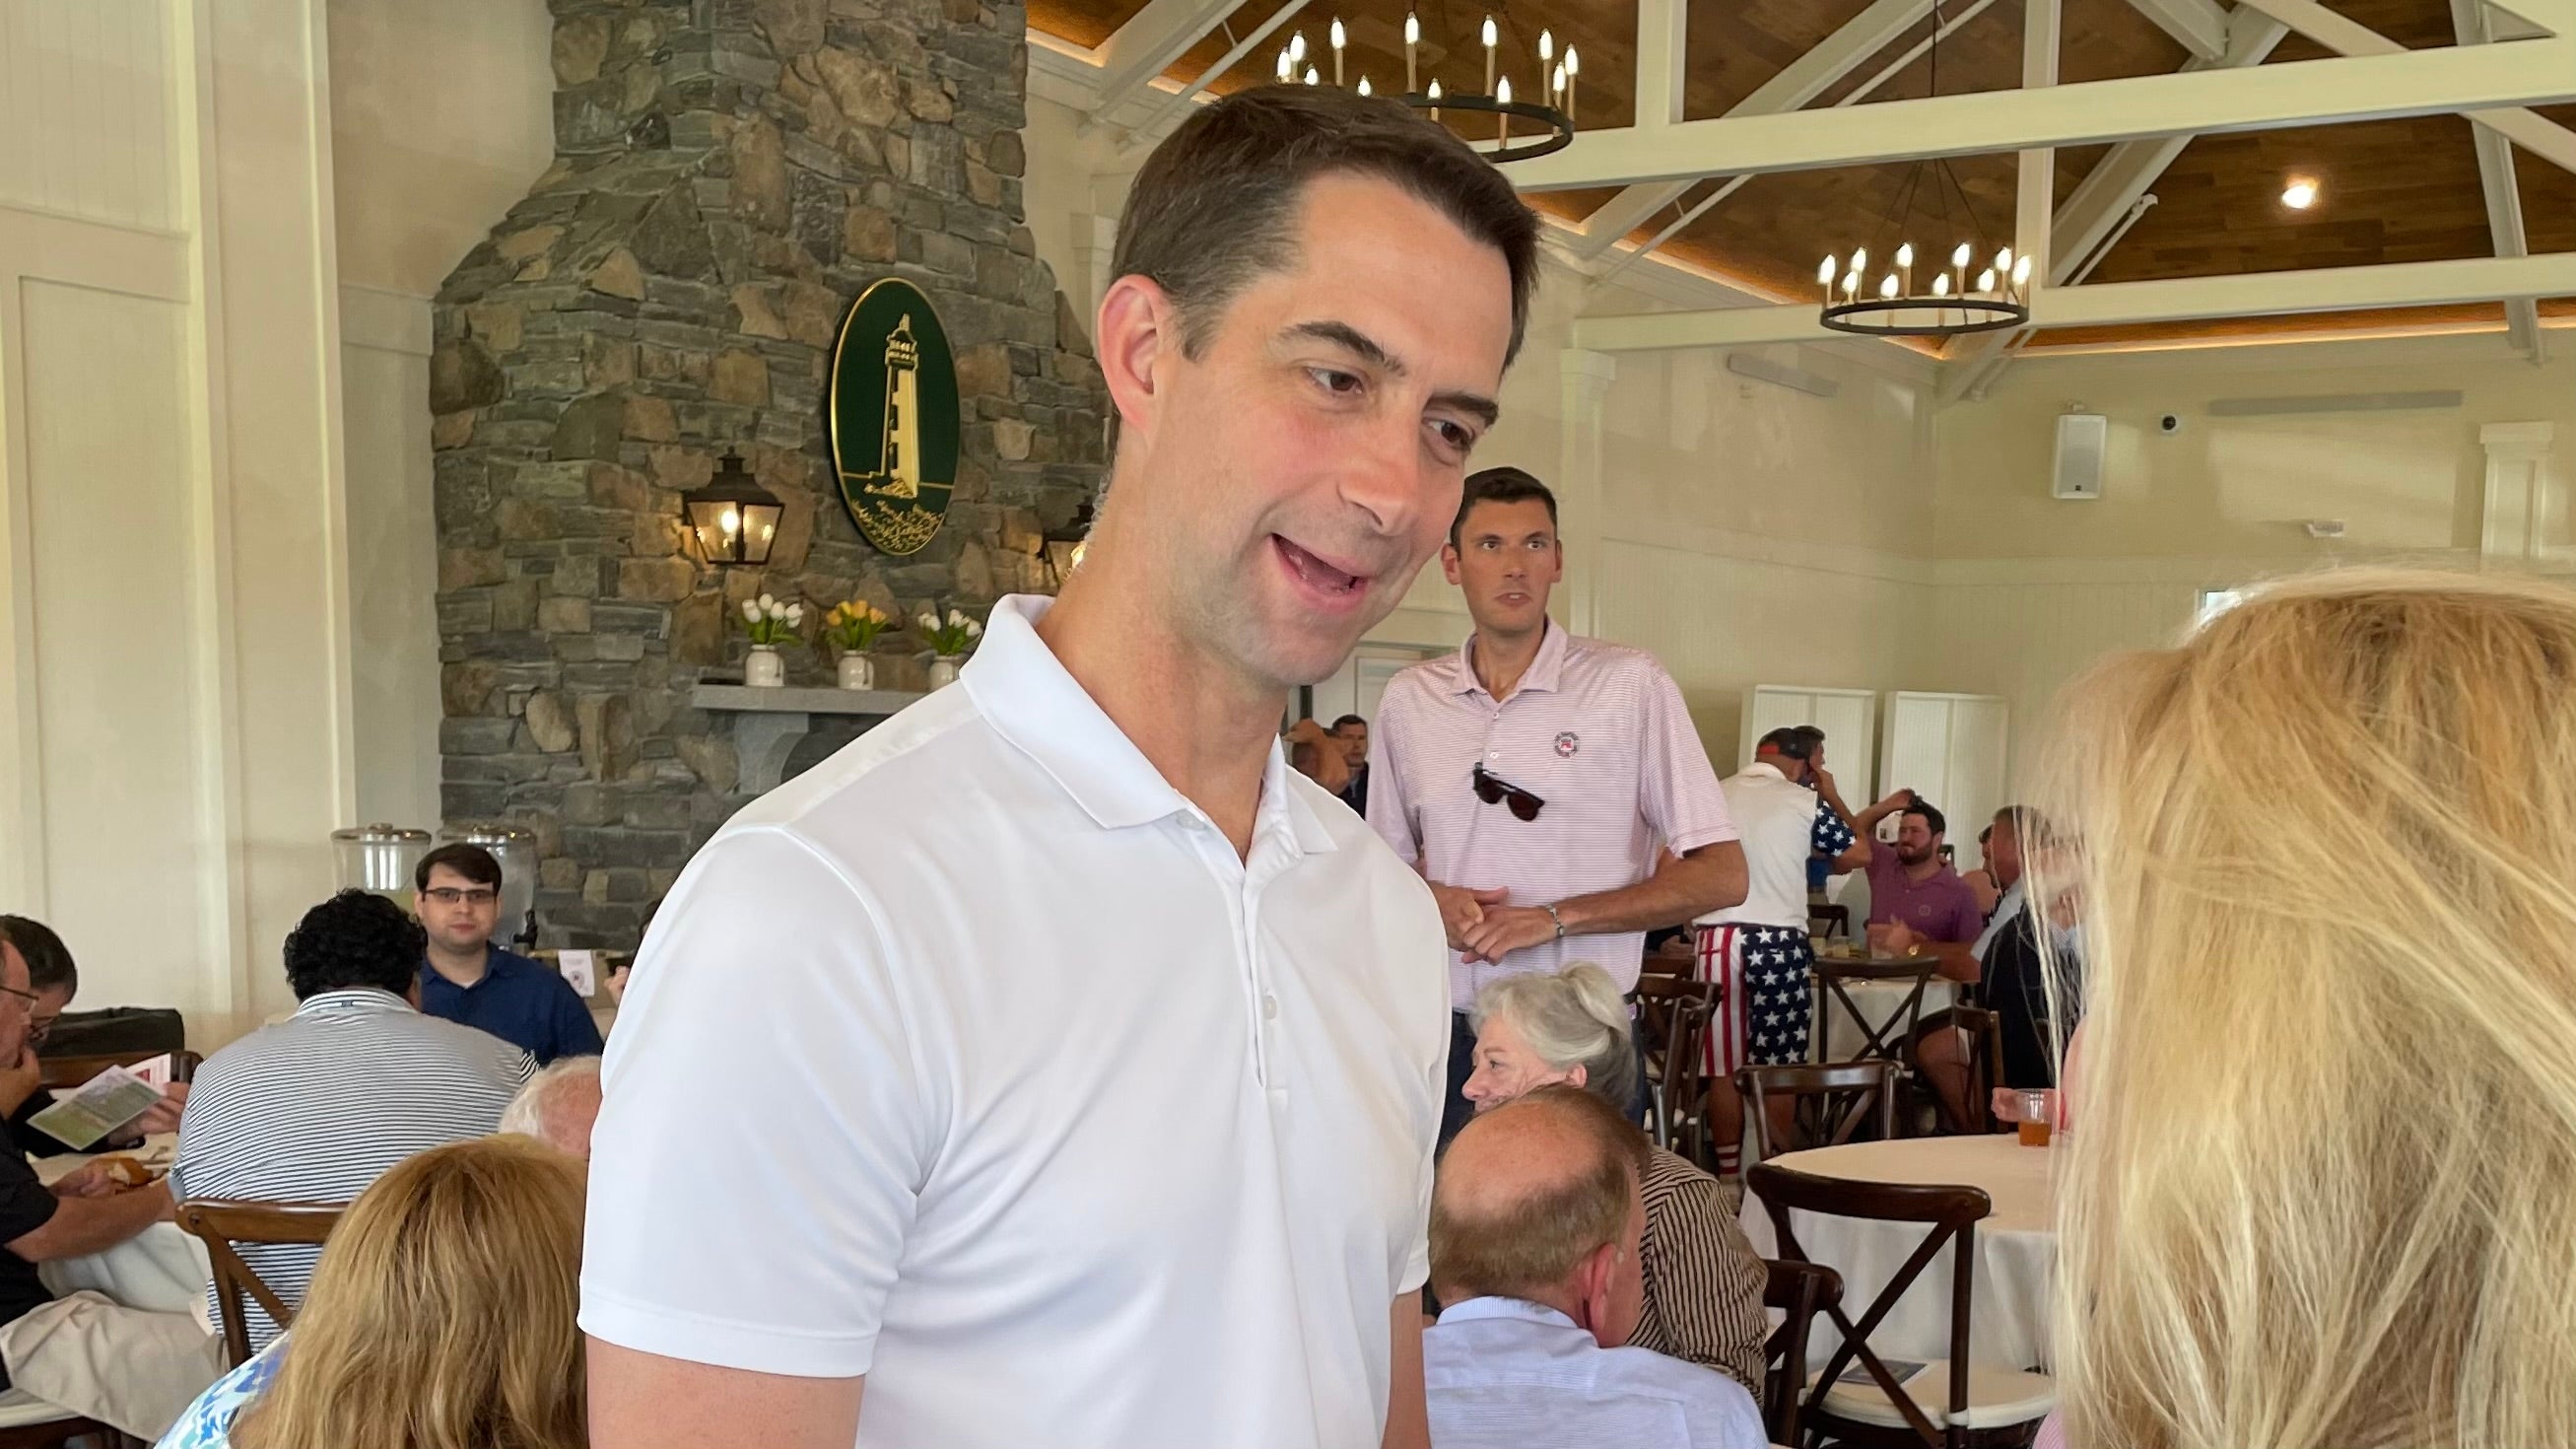 Sen. Tom Cotton’s 2022 mission to ‘put the brakes’ on Biden’s agenda may be prelude for potential 2024 run